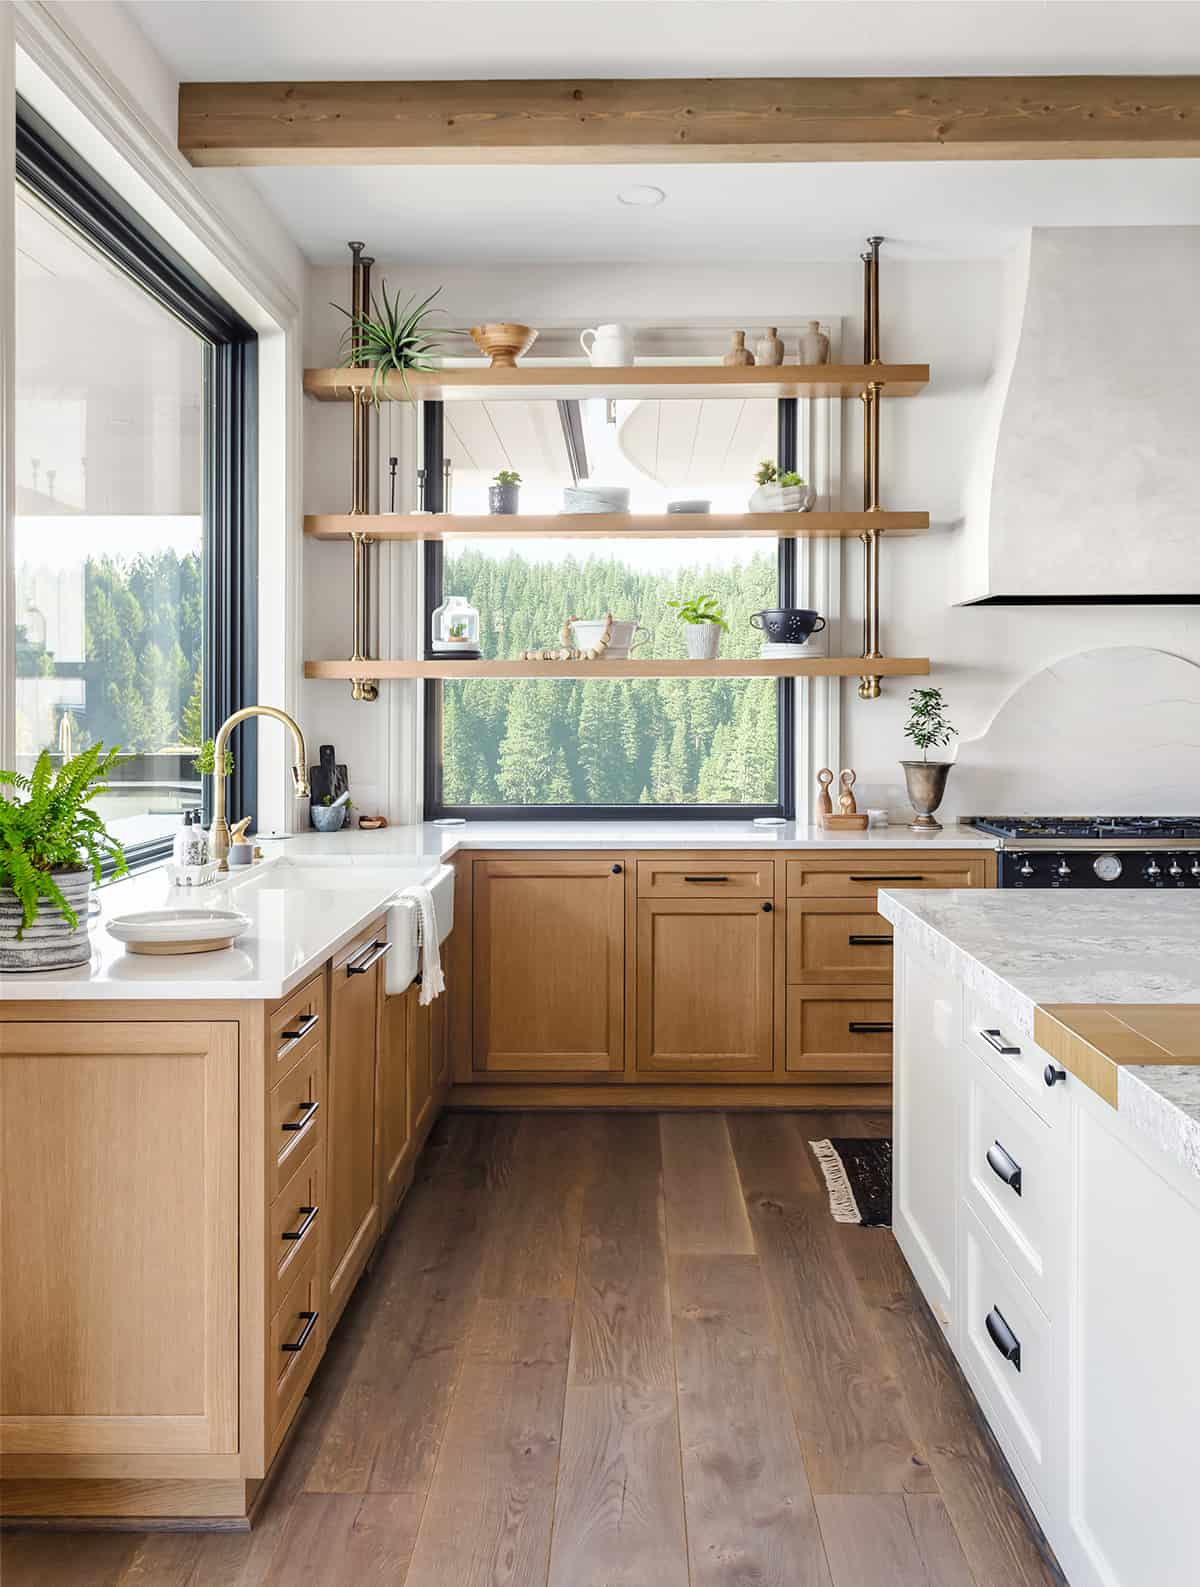 18 Inspiring Kitchen Remodel Ideas to Steal